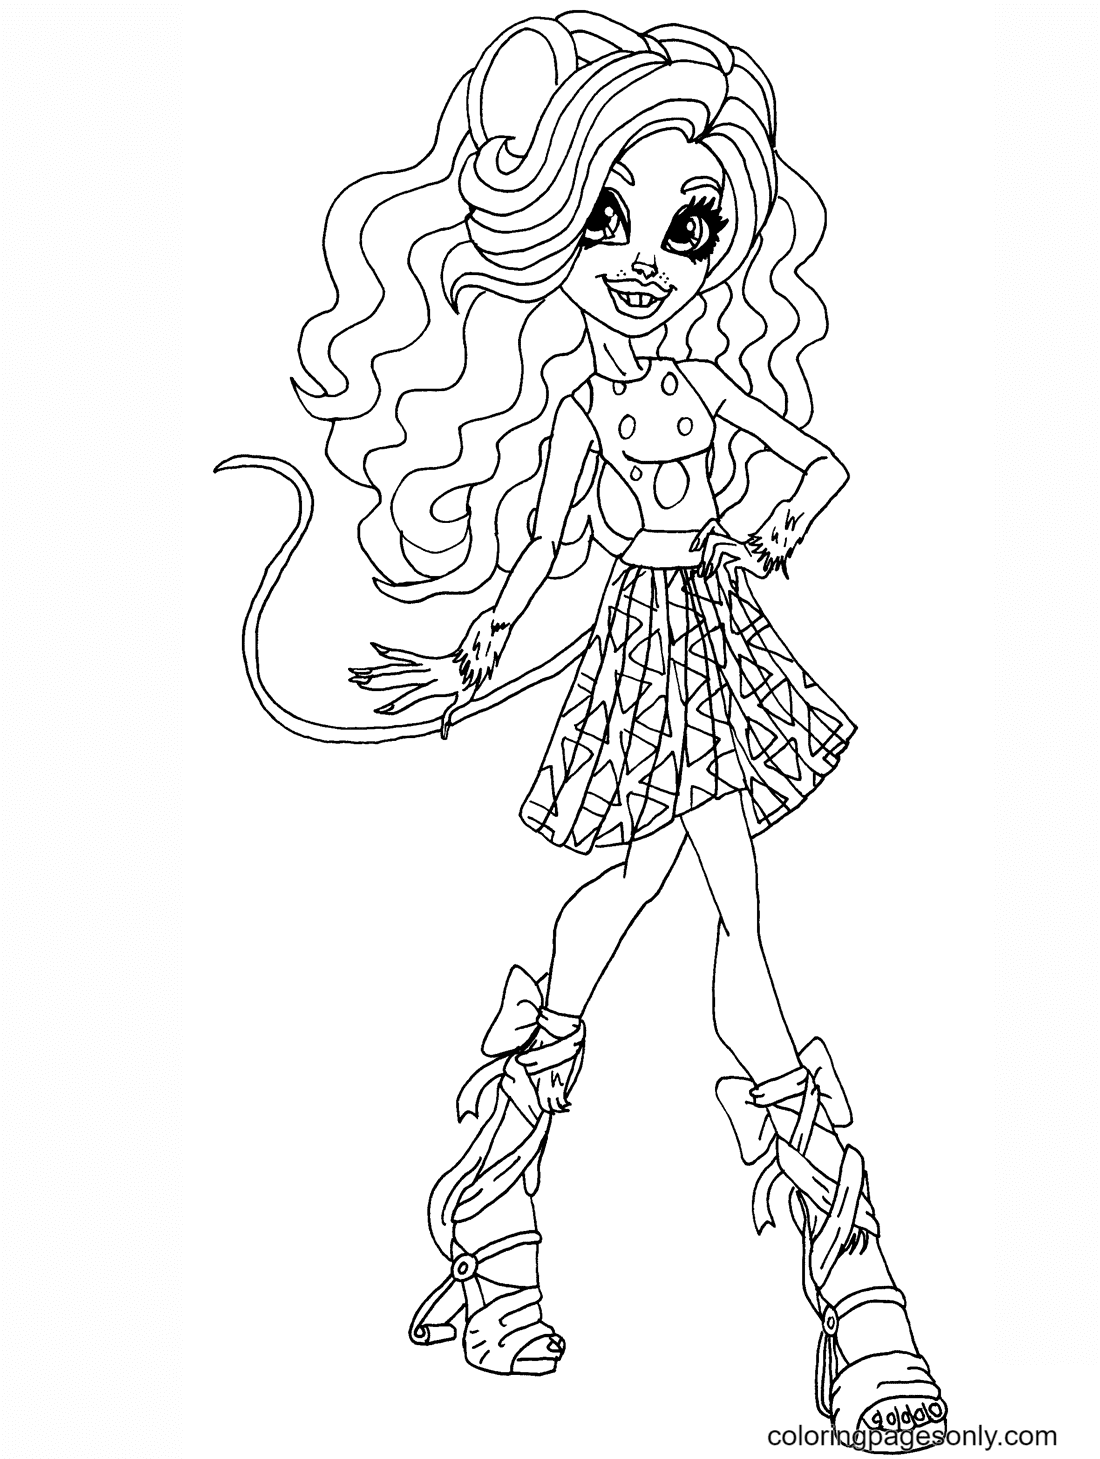 Mouscedes King Coloring Page